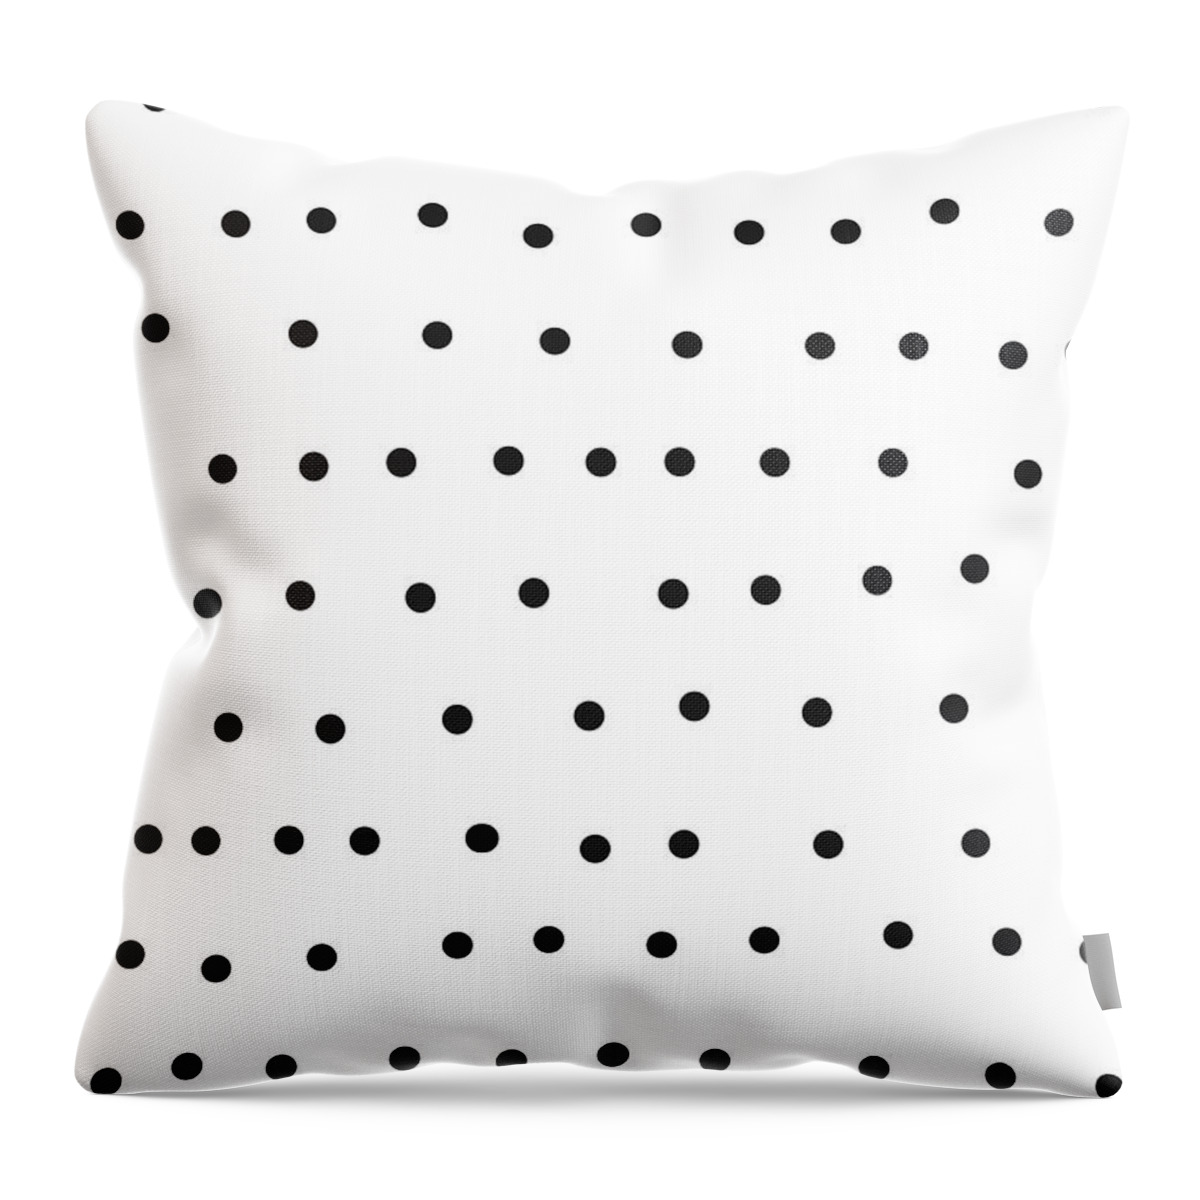 Polka Dots Throw Pillow featuring the digital art Black And White Whimsical Polka Dots by Ashley Rice